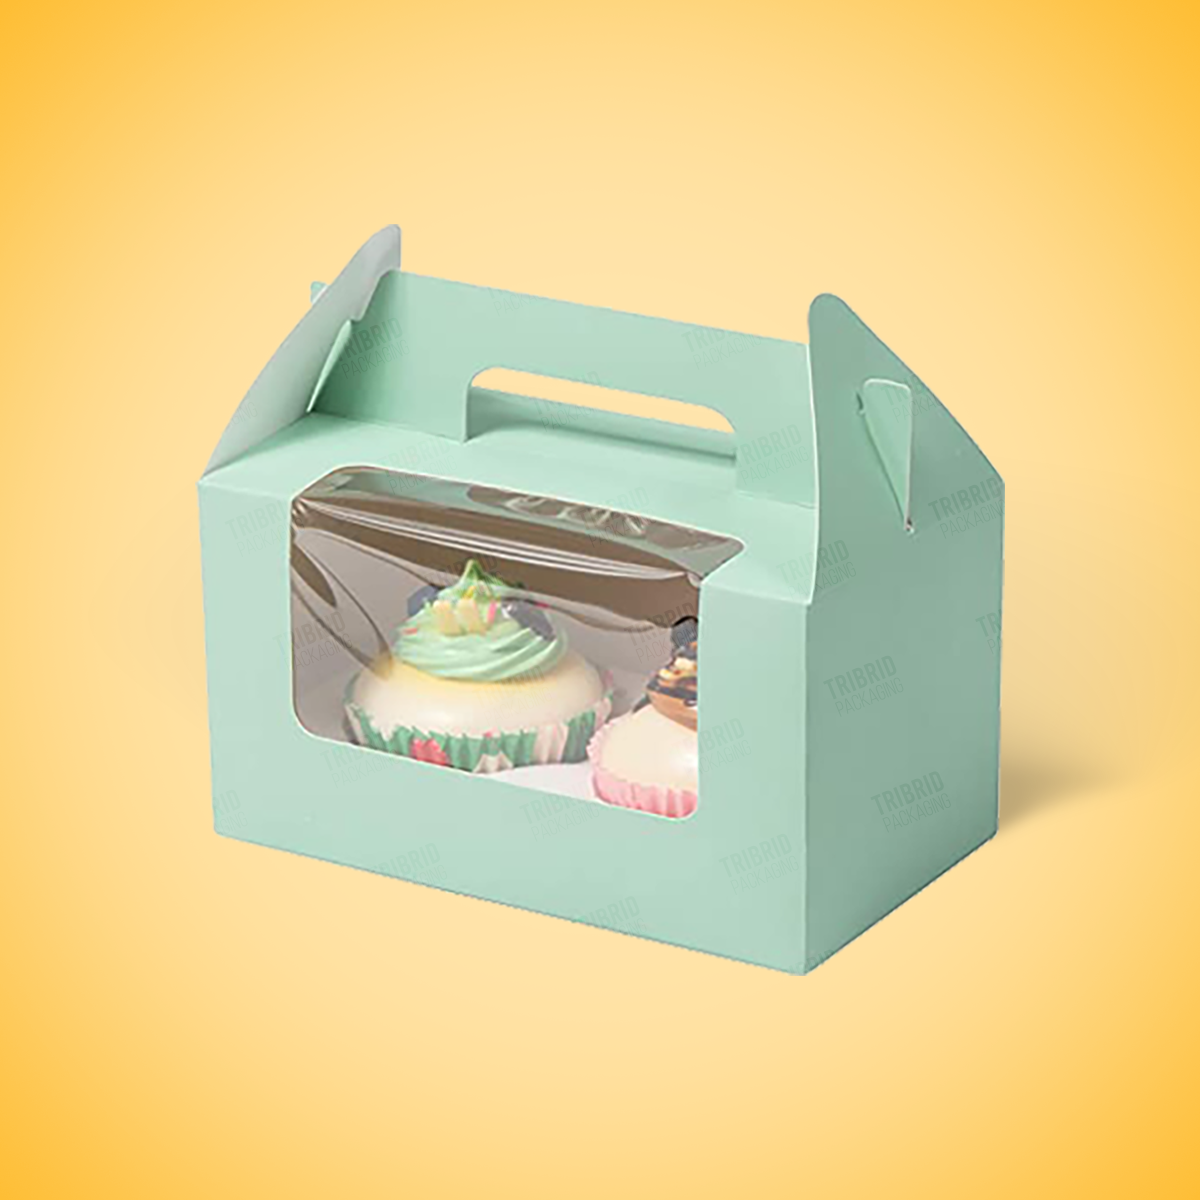 Cardboard bakery long packaging with abstract window and